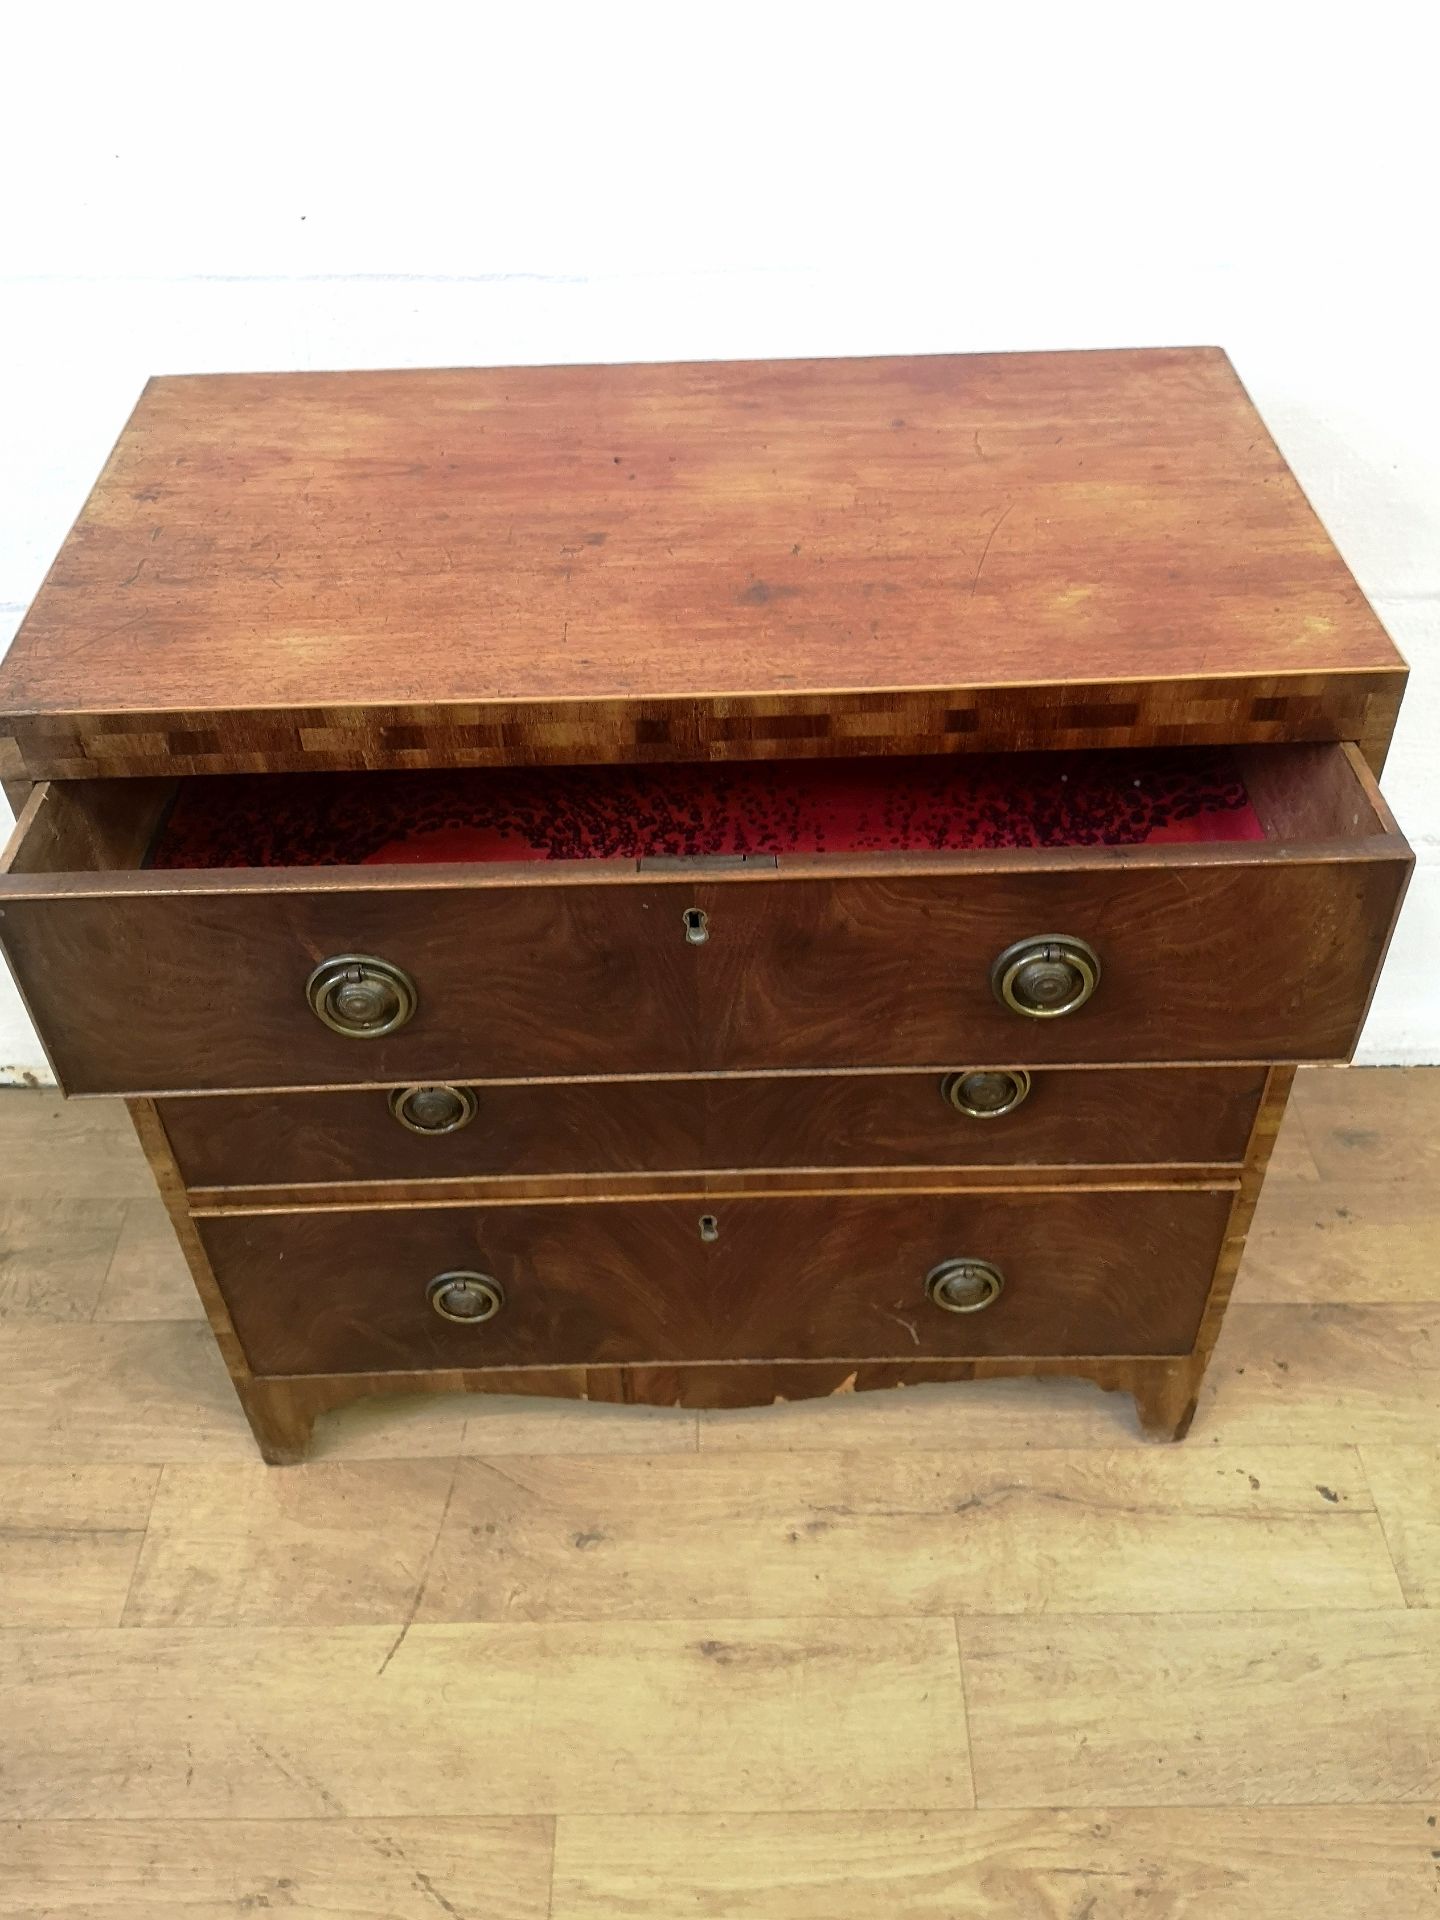 Victorian mahogany chest of drawers - Image 5 of 6